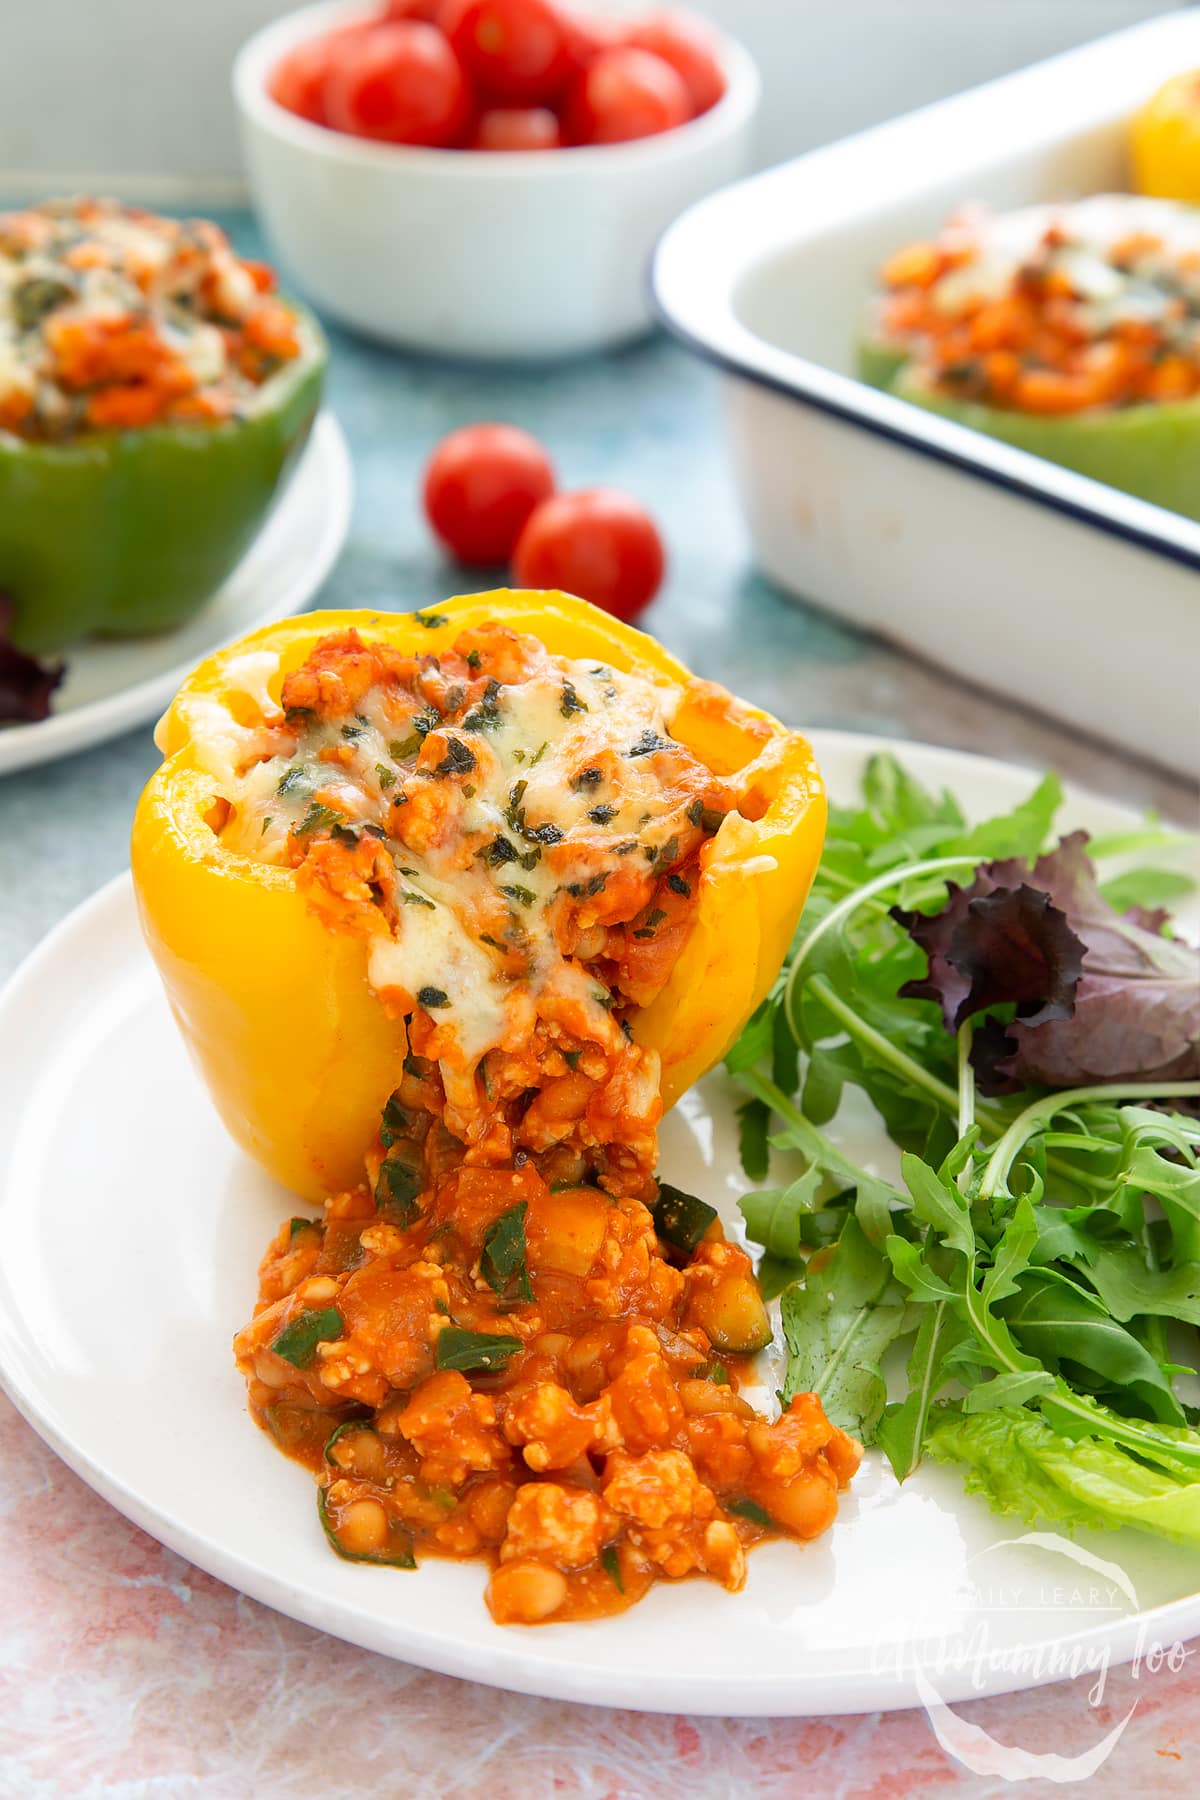 A yellow pepper stuffed with turkey mince, vegetables and baked beans with melted cheese on top. The filling spills onto the white plate. More baked bean stuffed peppers are shown in the background.